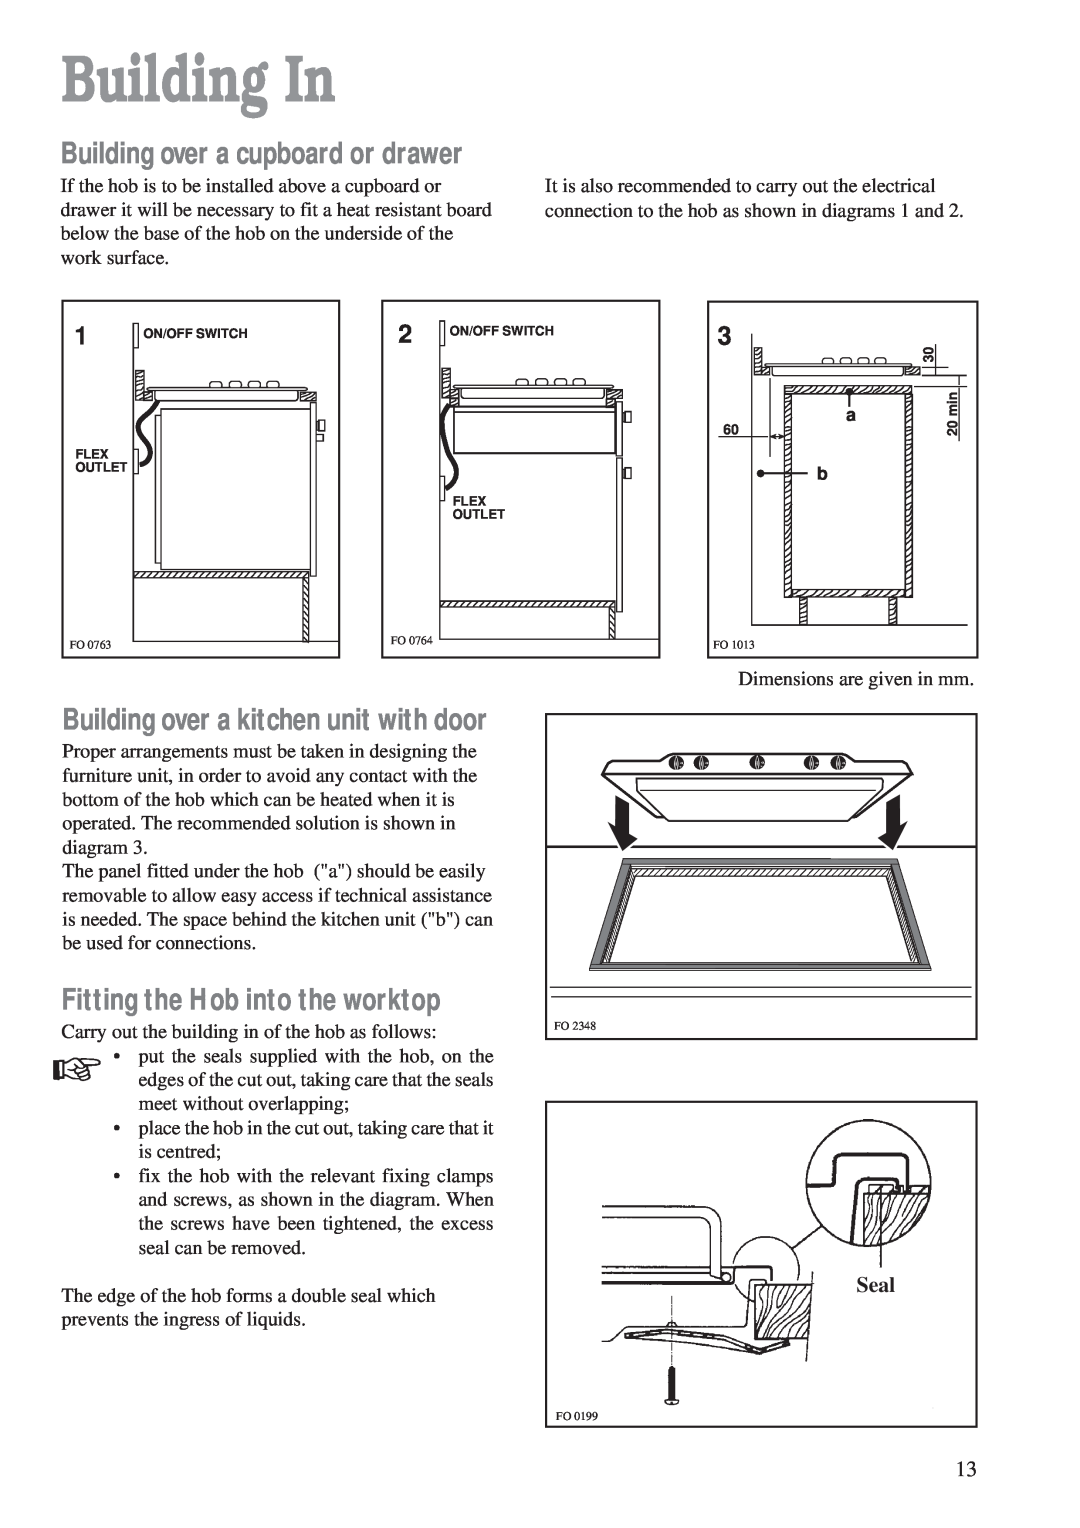 Zanussi ZGF 982 manual Building In, Building over a cupboard or drawer, Fitting the Hob into the worktop, Seal 